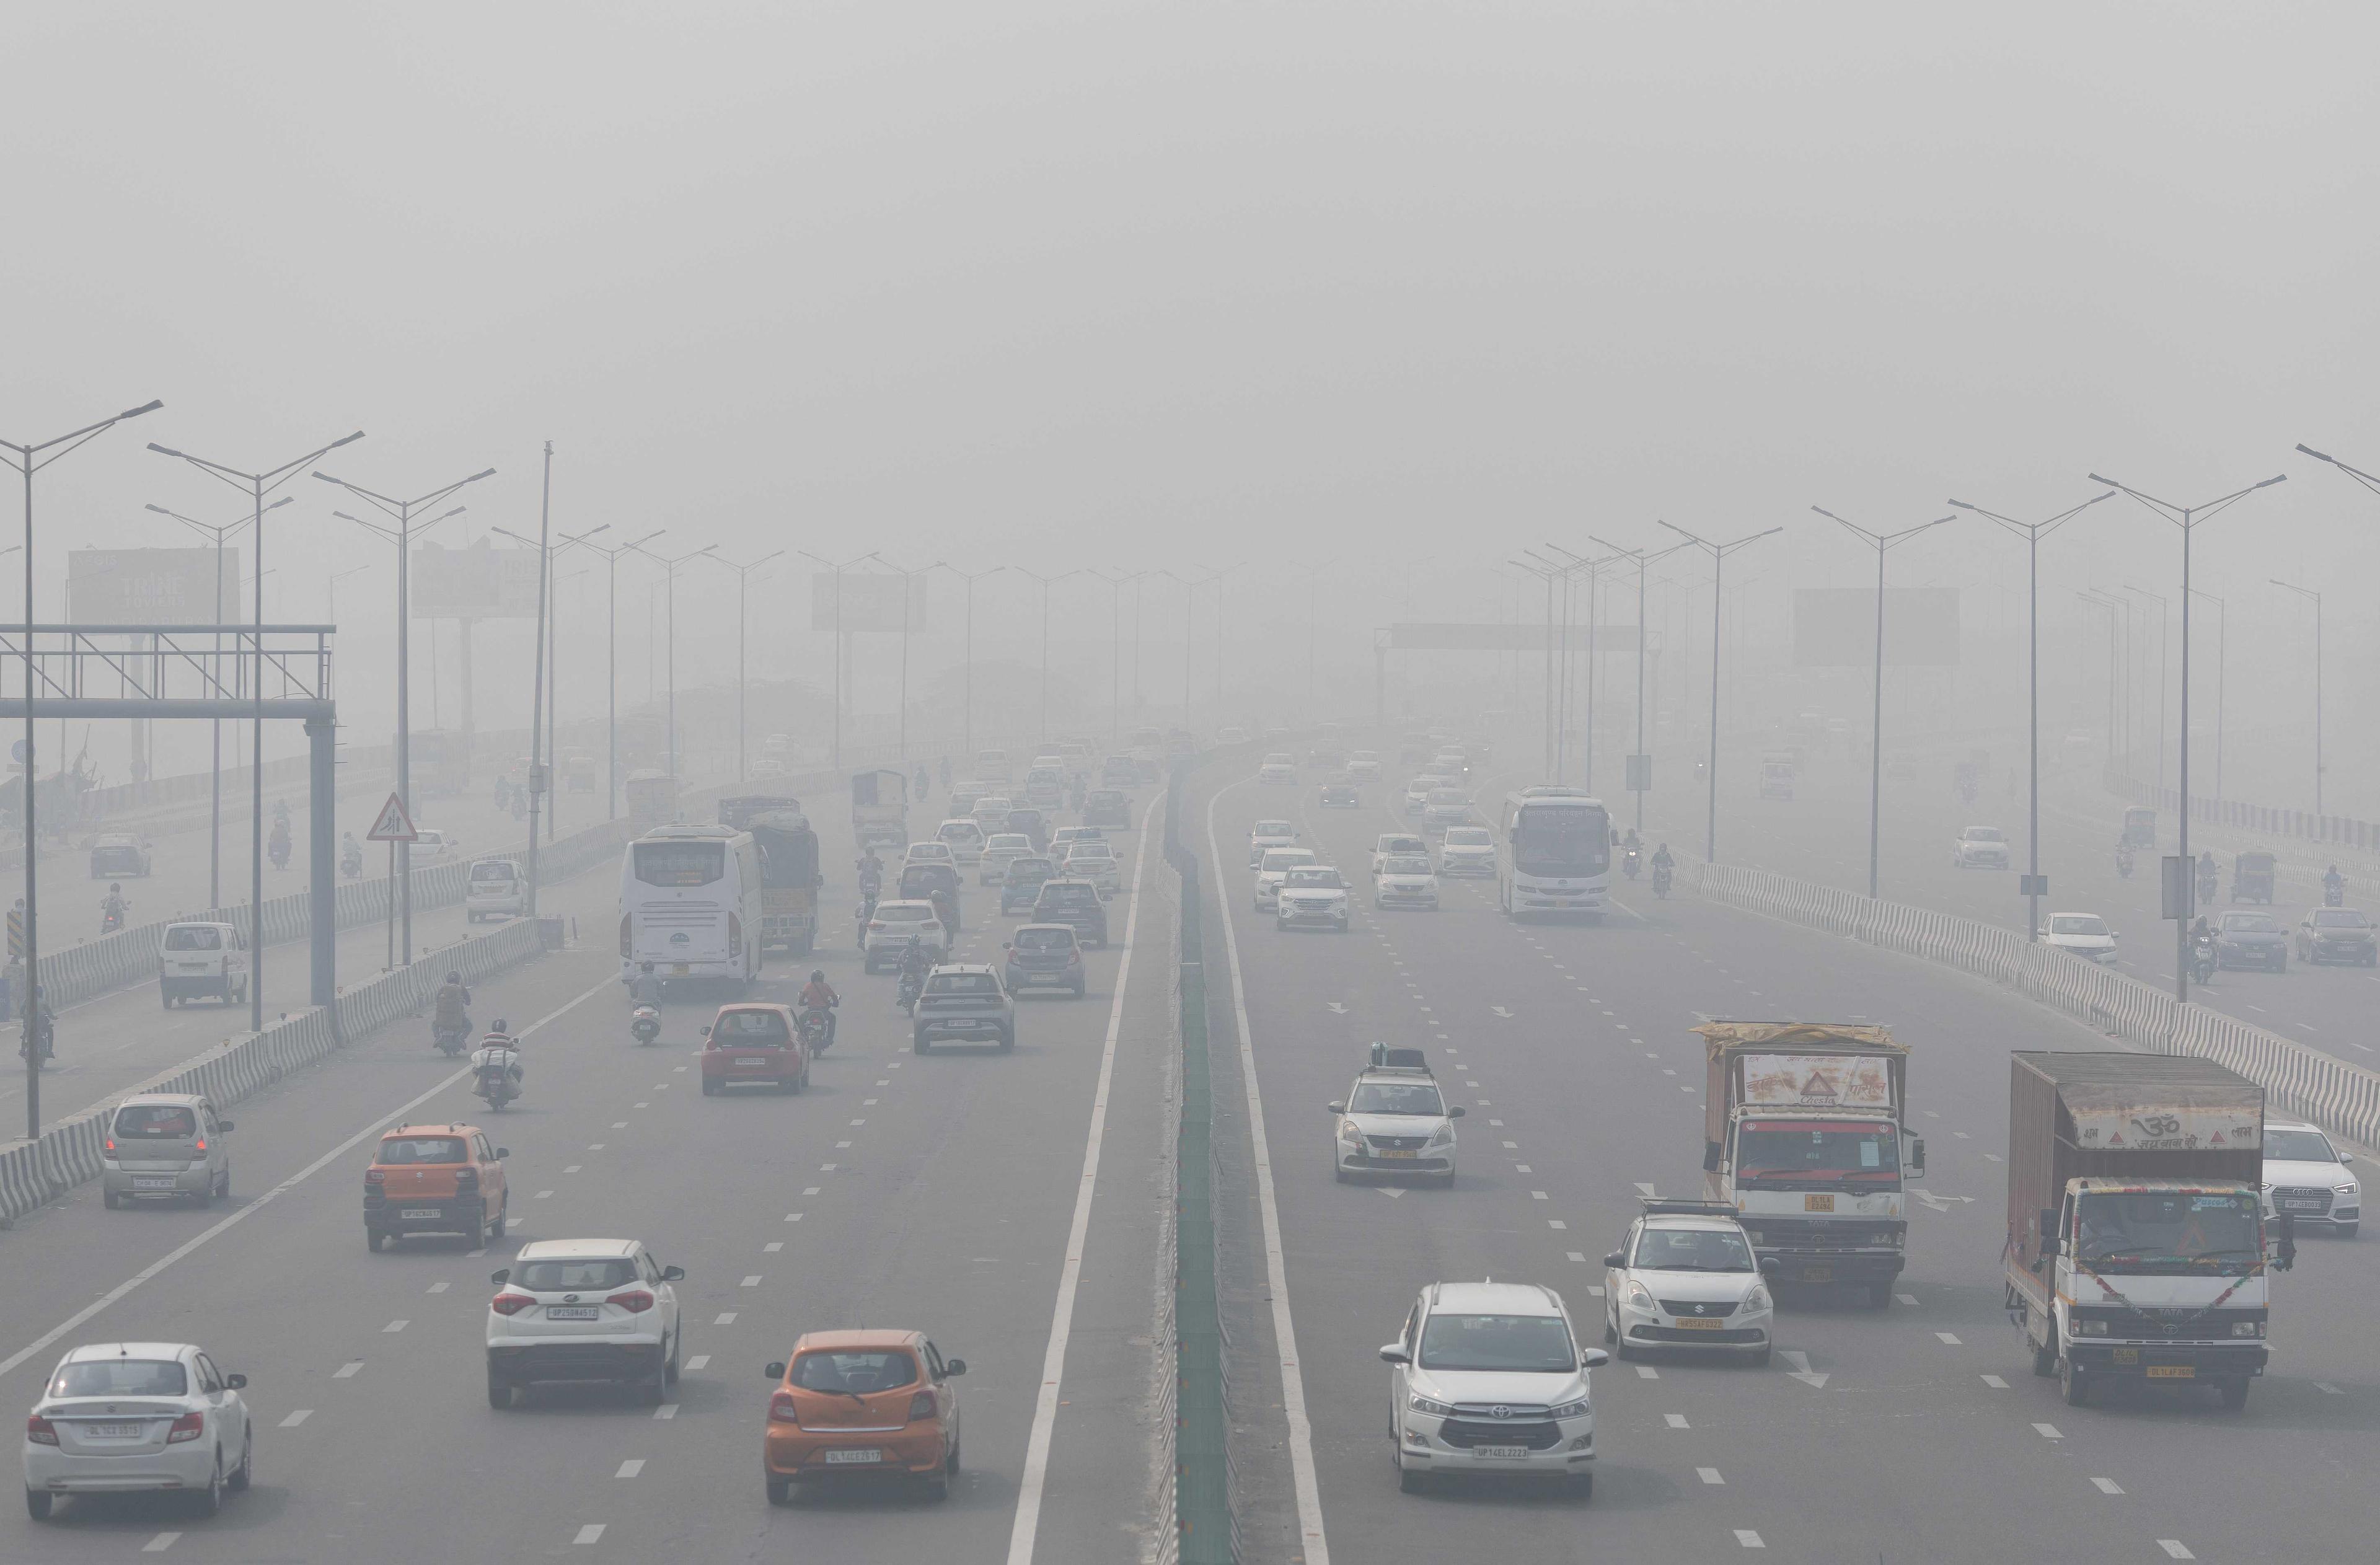 Traffic moves along a highway shrouded in heavy smog in New Delhi, India, Nov 3. Photo: Reuters